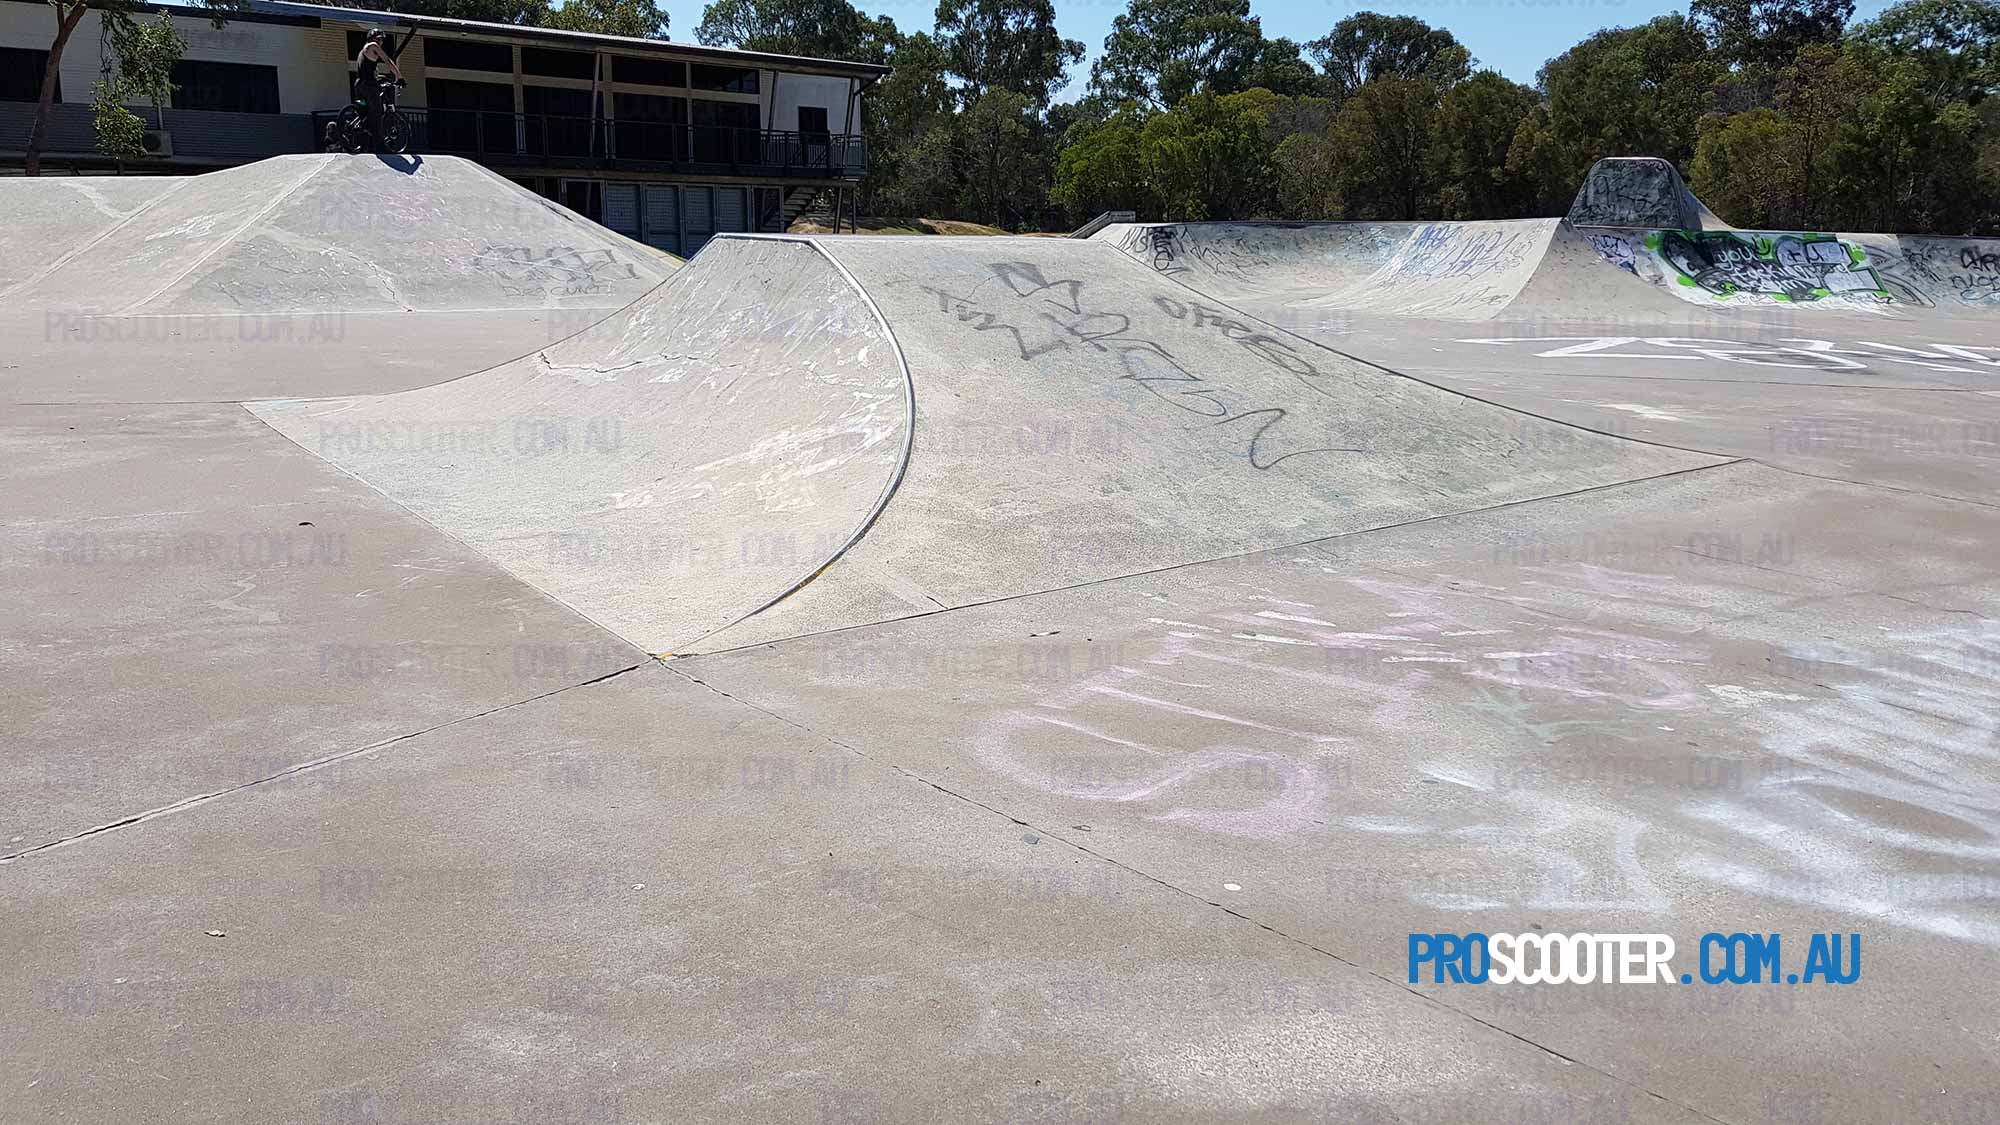 Get some serious air at Crestmead Skatepark